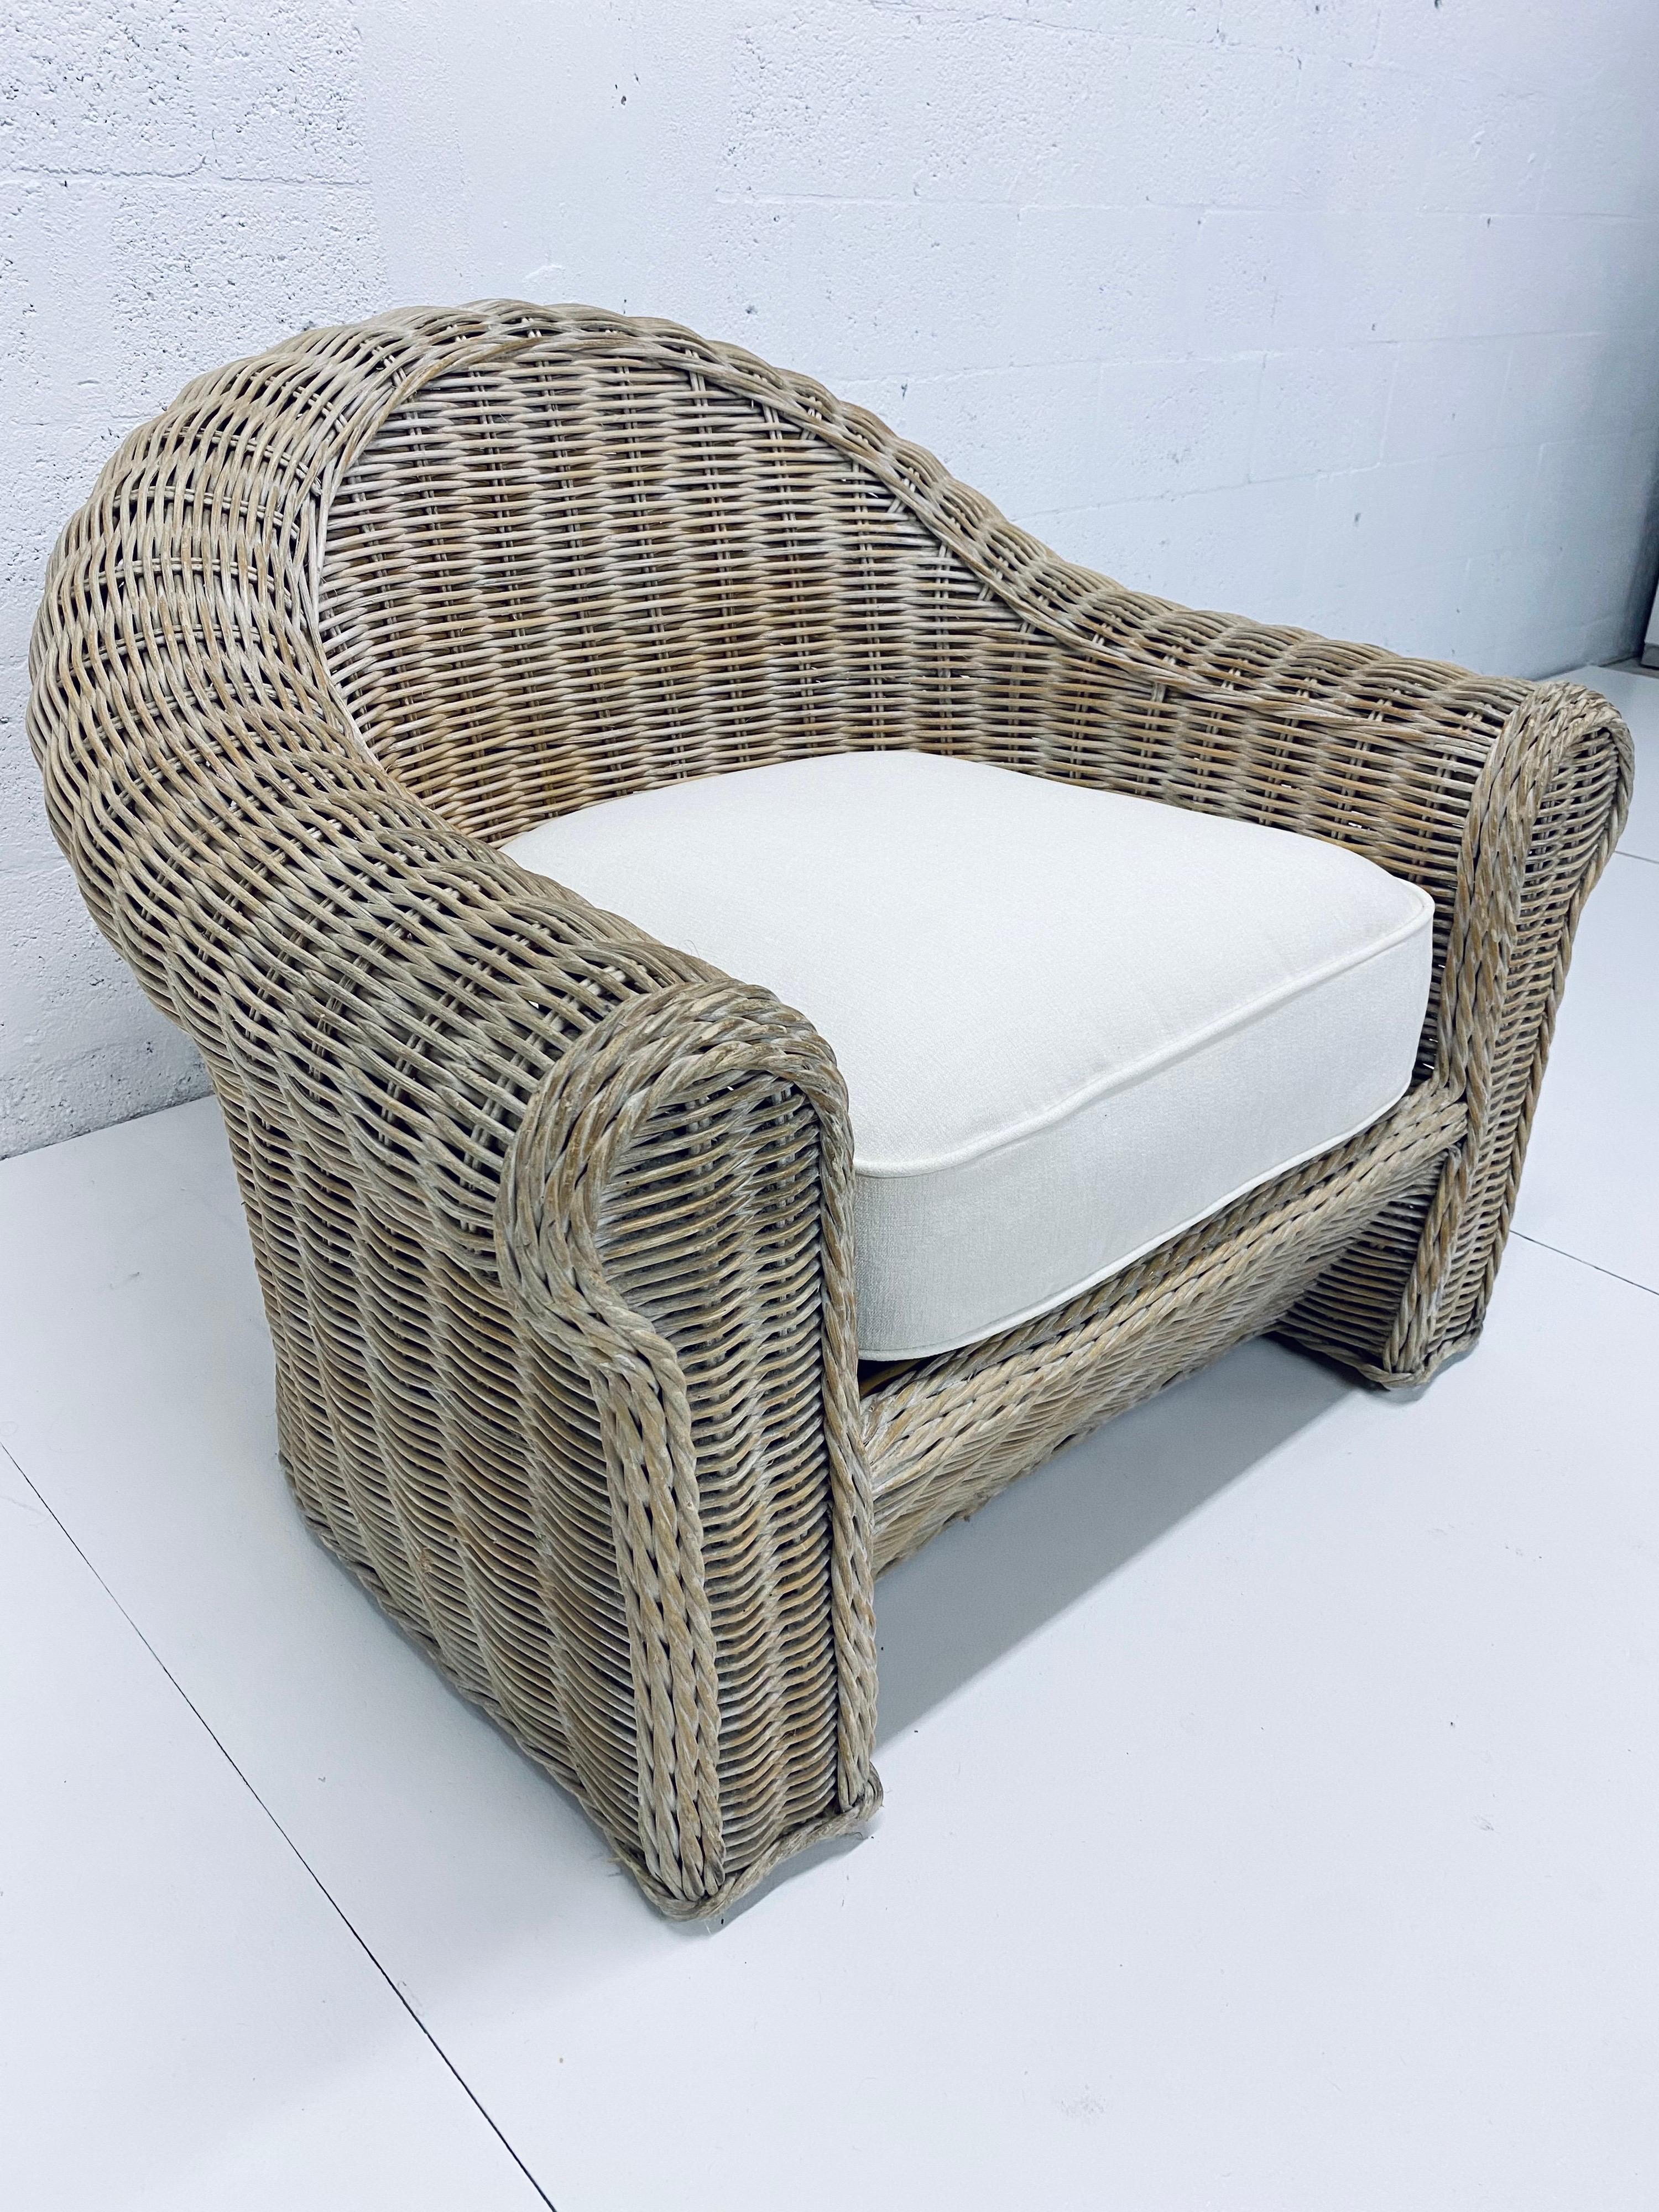 Mid-Century Modern Midcentury Woven Reed Lounge Chair with New White Cotton Linen Upholstery For Sale